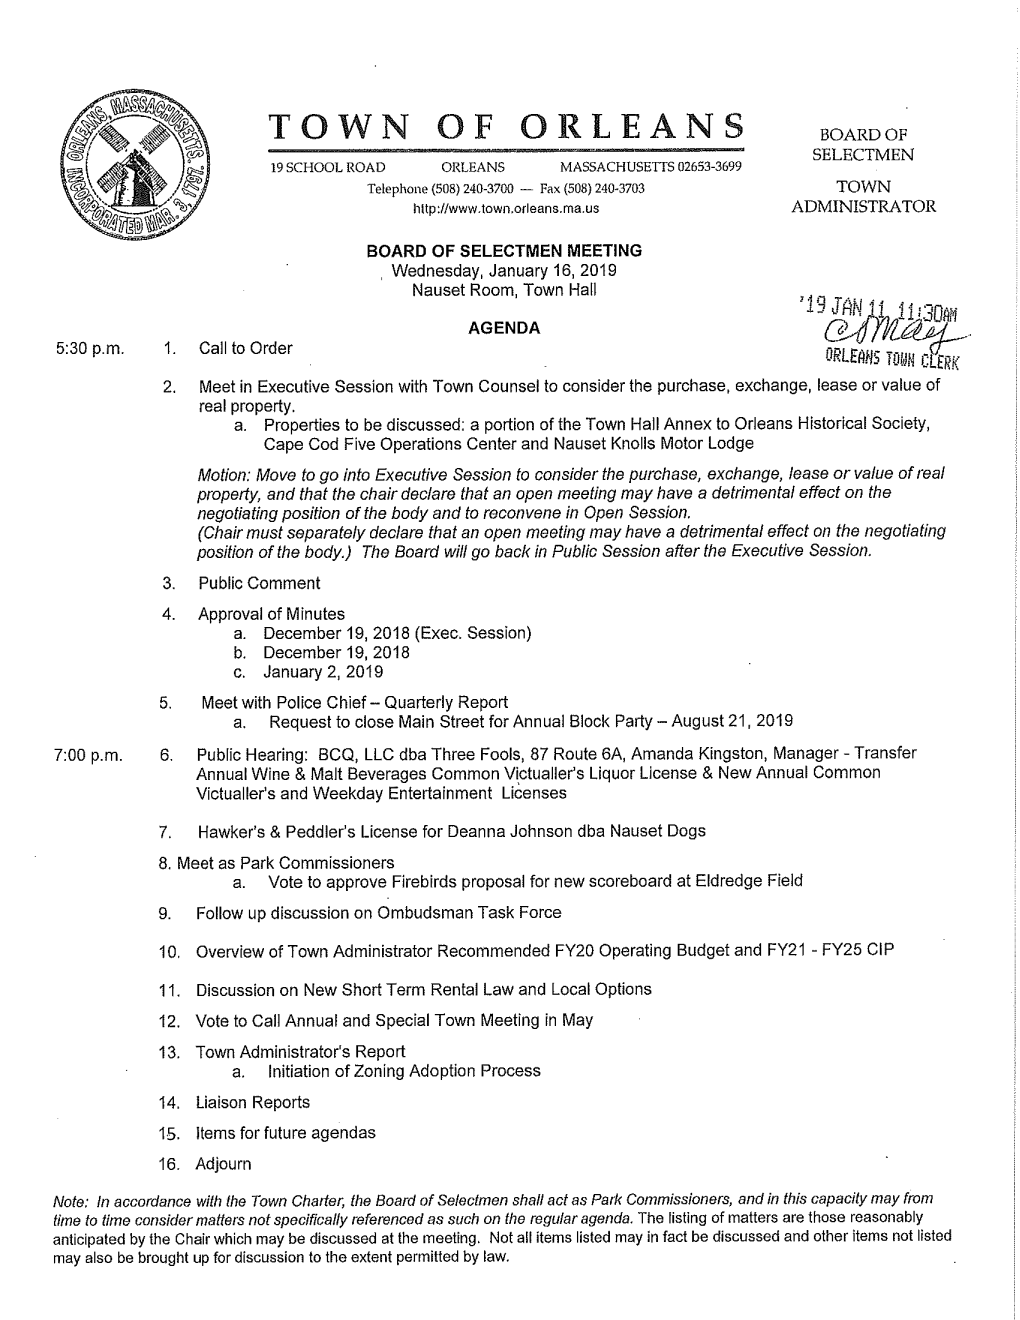 BOARD of SELECTMEN OFFICE of the TOWN AGENDA ACTION REQUEST ADMINSTRATOR Meeting Date: January 16, 2019